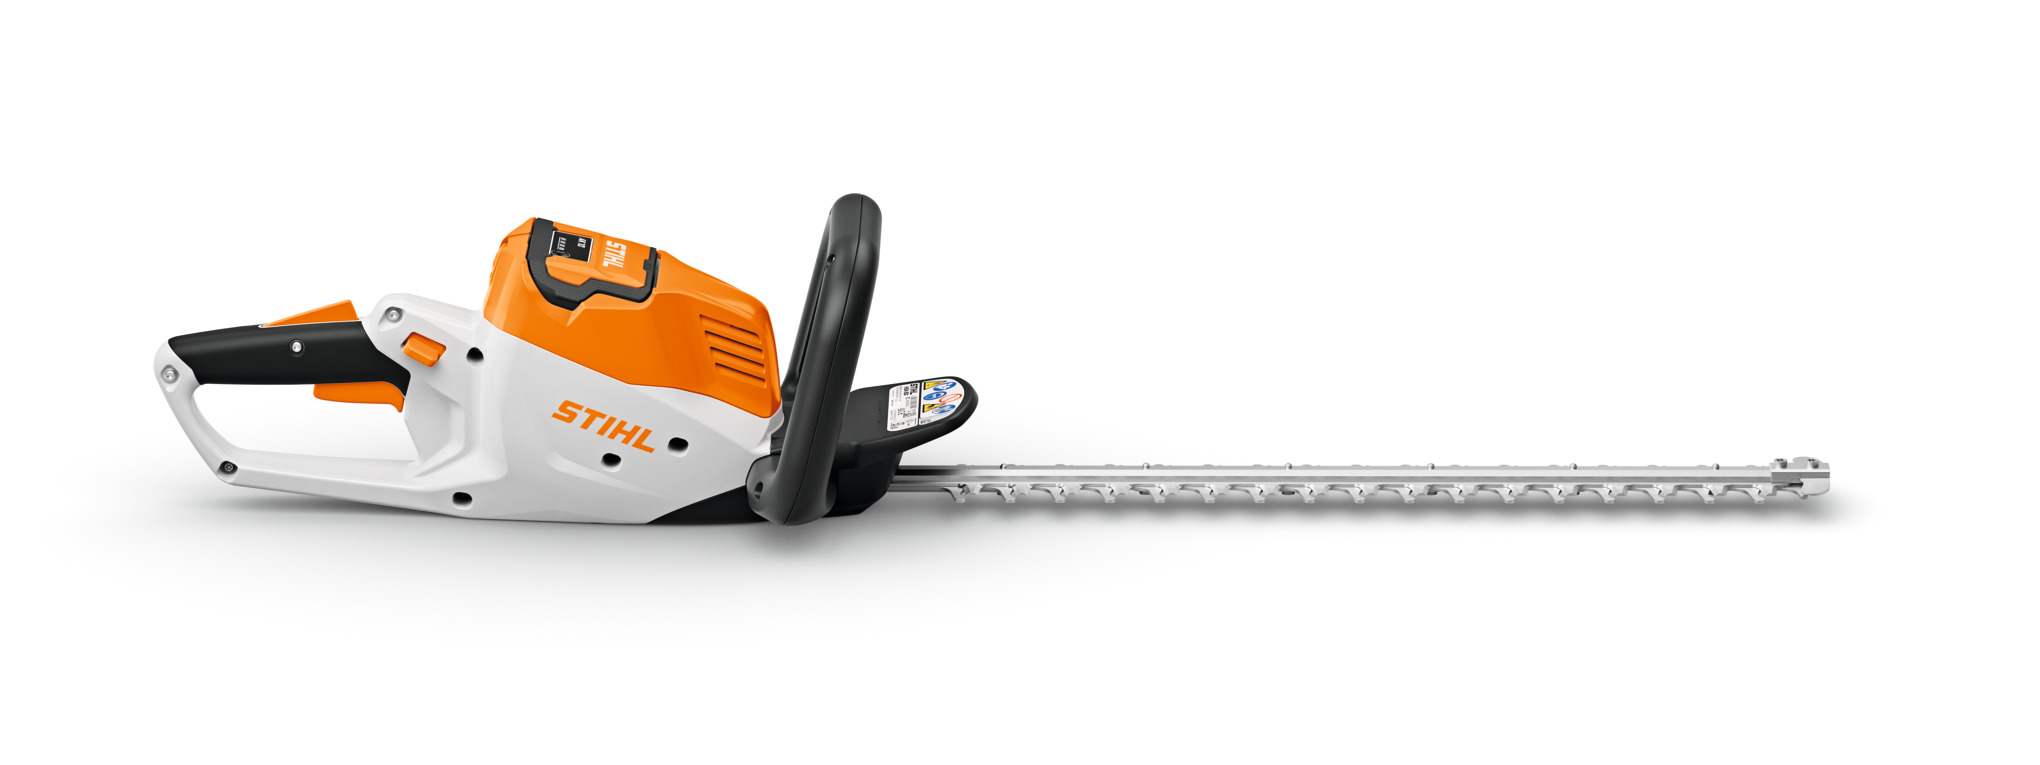 HSA 50 Cordless Hedge Trimmer - AK System